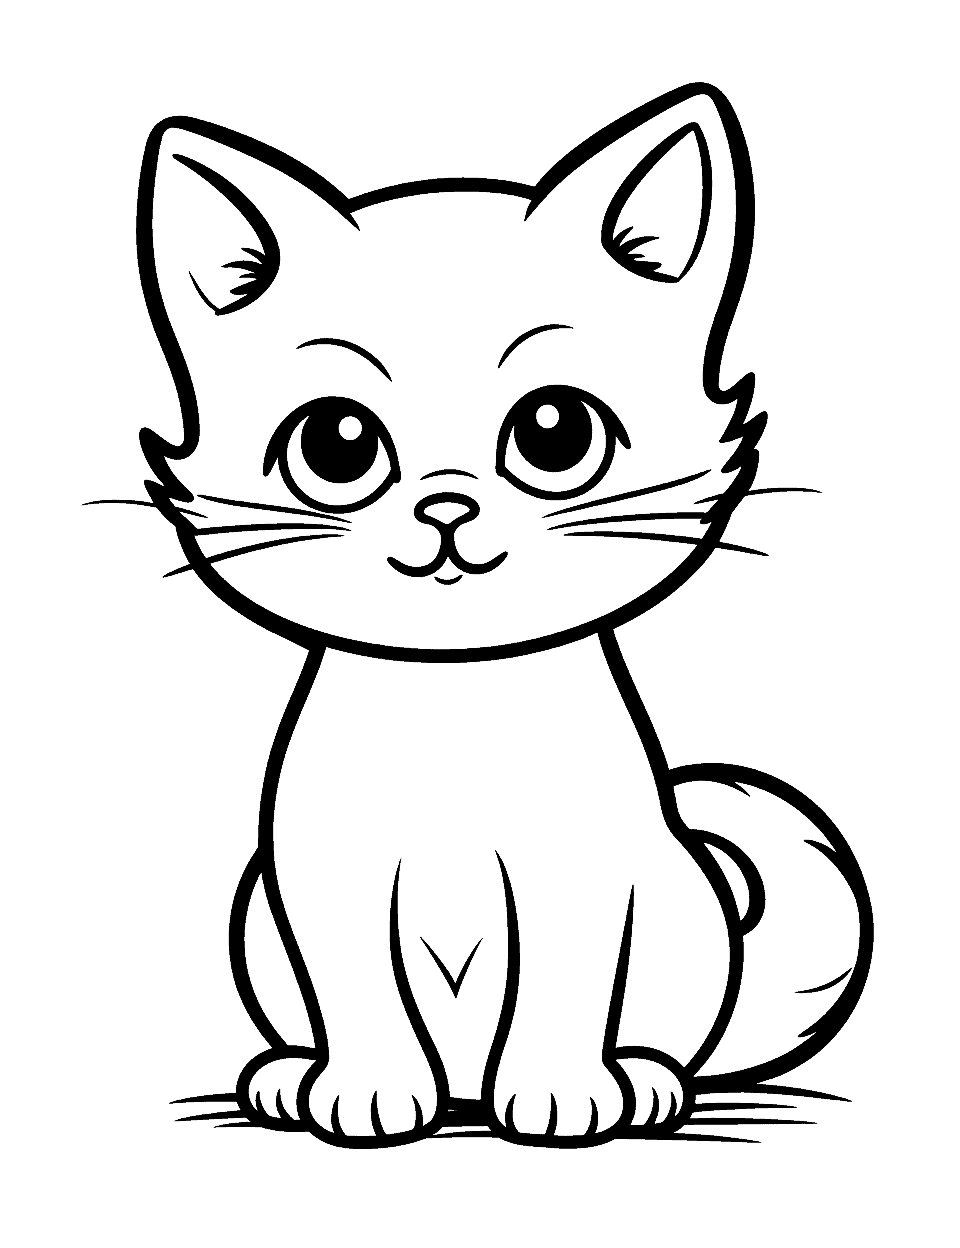 Simple Outline of a Baby Cat Coloring Page - A simple but cute outline of a baby cat, perfect for little hands to color.